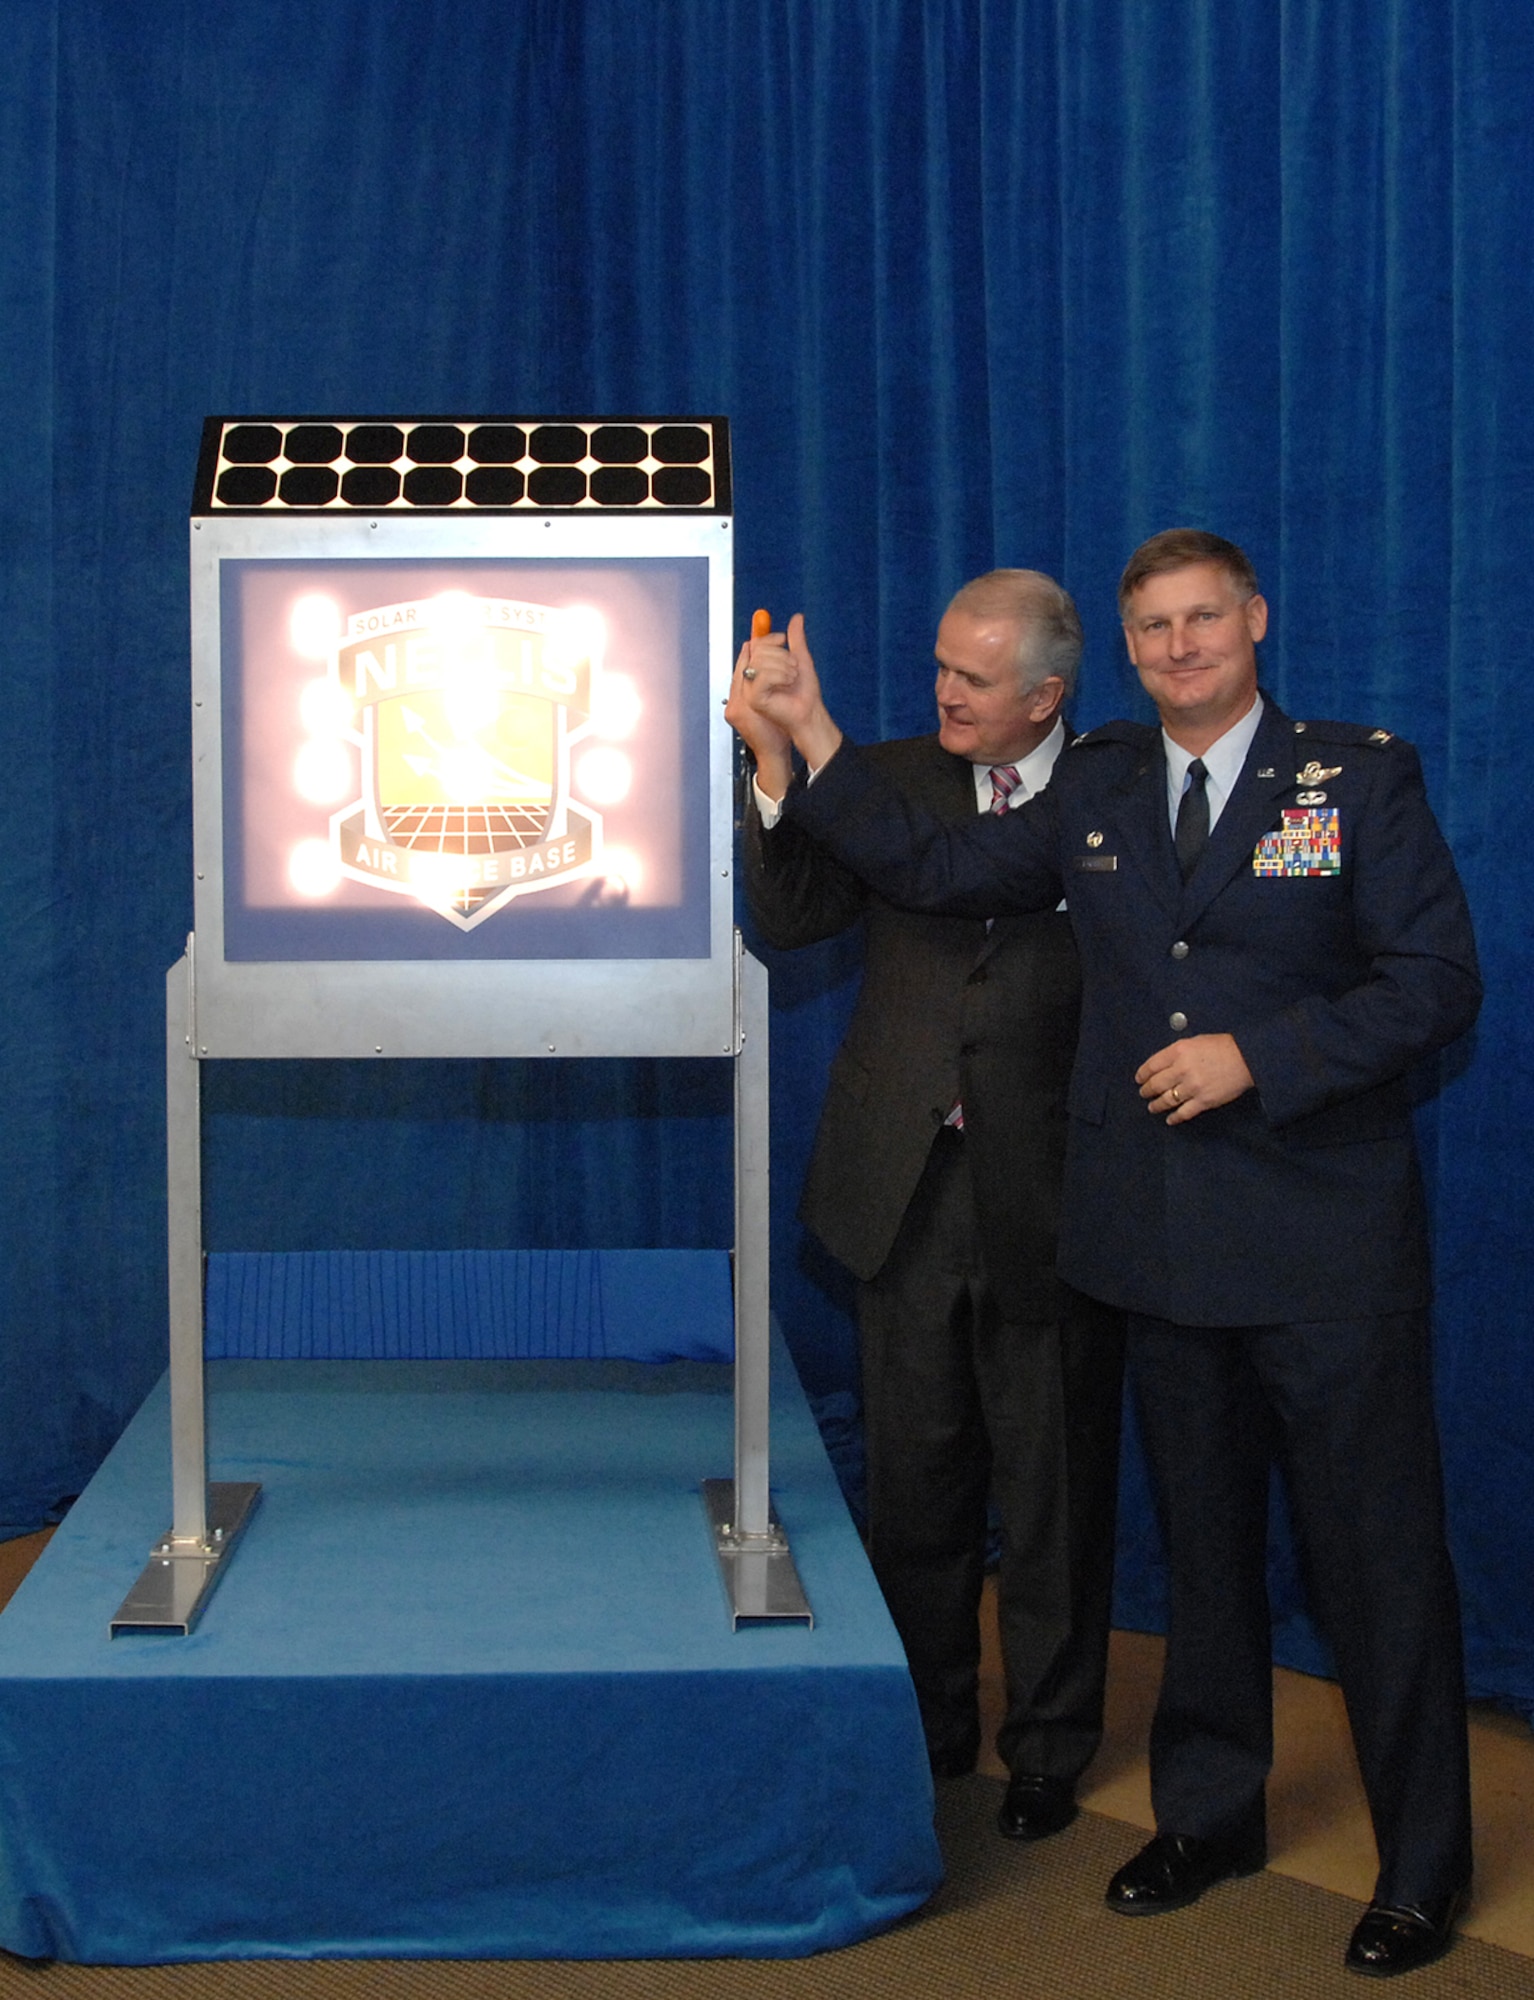 Col. Michael Bartley, 99th Air Base Wing commander, Nellis AFB, along with Nevada Governor Jim Gibbons flip the switch to the North America's largest solar photovoltaic power plant located at Nellis Air Force Base, Nev., Dec. 17, 2007. The Solar Power System is a $100 million project, covering a total of 140 acres and providing over 14.2 megawatts of electricity. The Nellis Solar Power System will meet an average of 25 percent of Nellis' electricity requirements saving over $1 million dollars annually.
(U.S. Air Force photo by Staff Sgt. Scottie McCord)